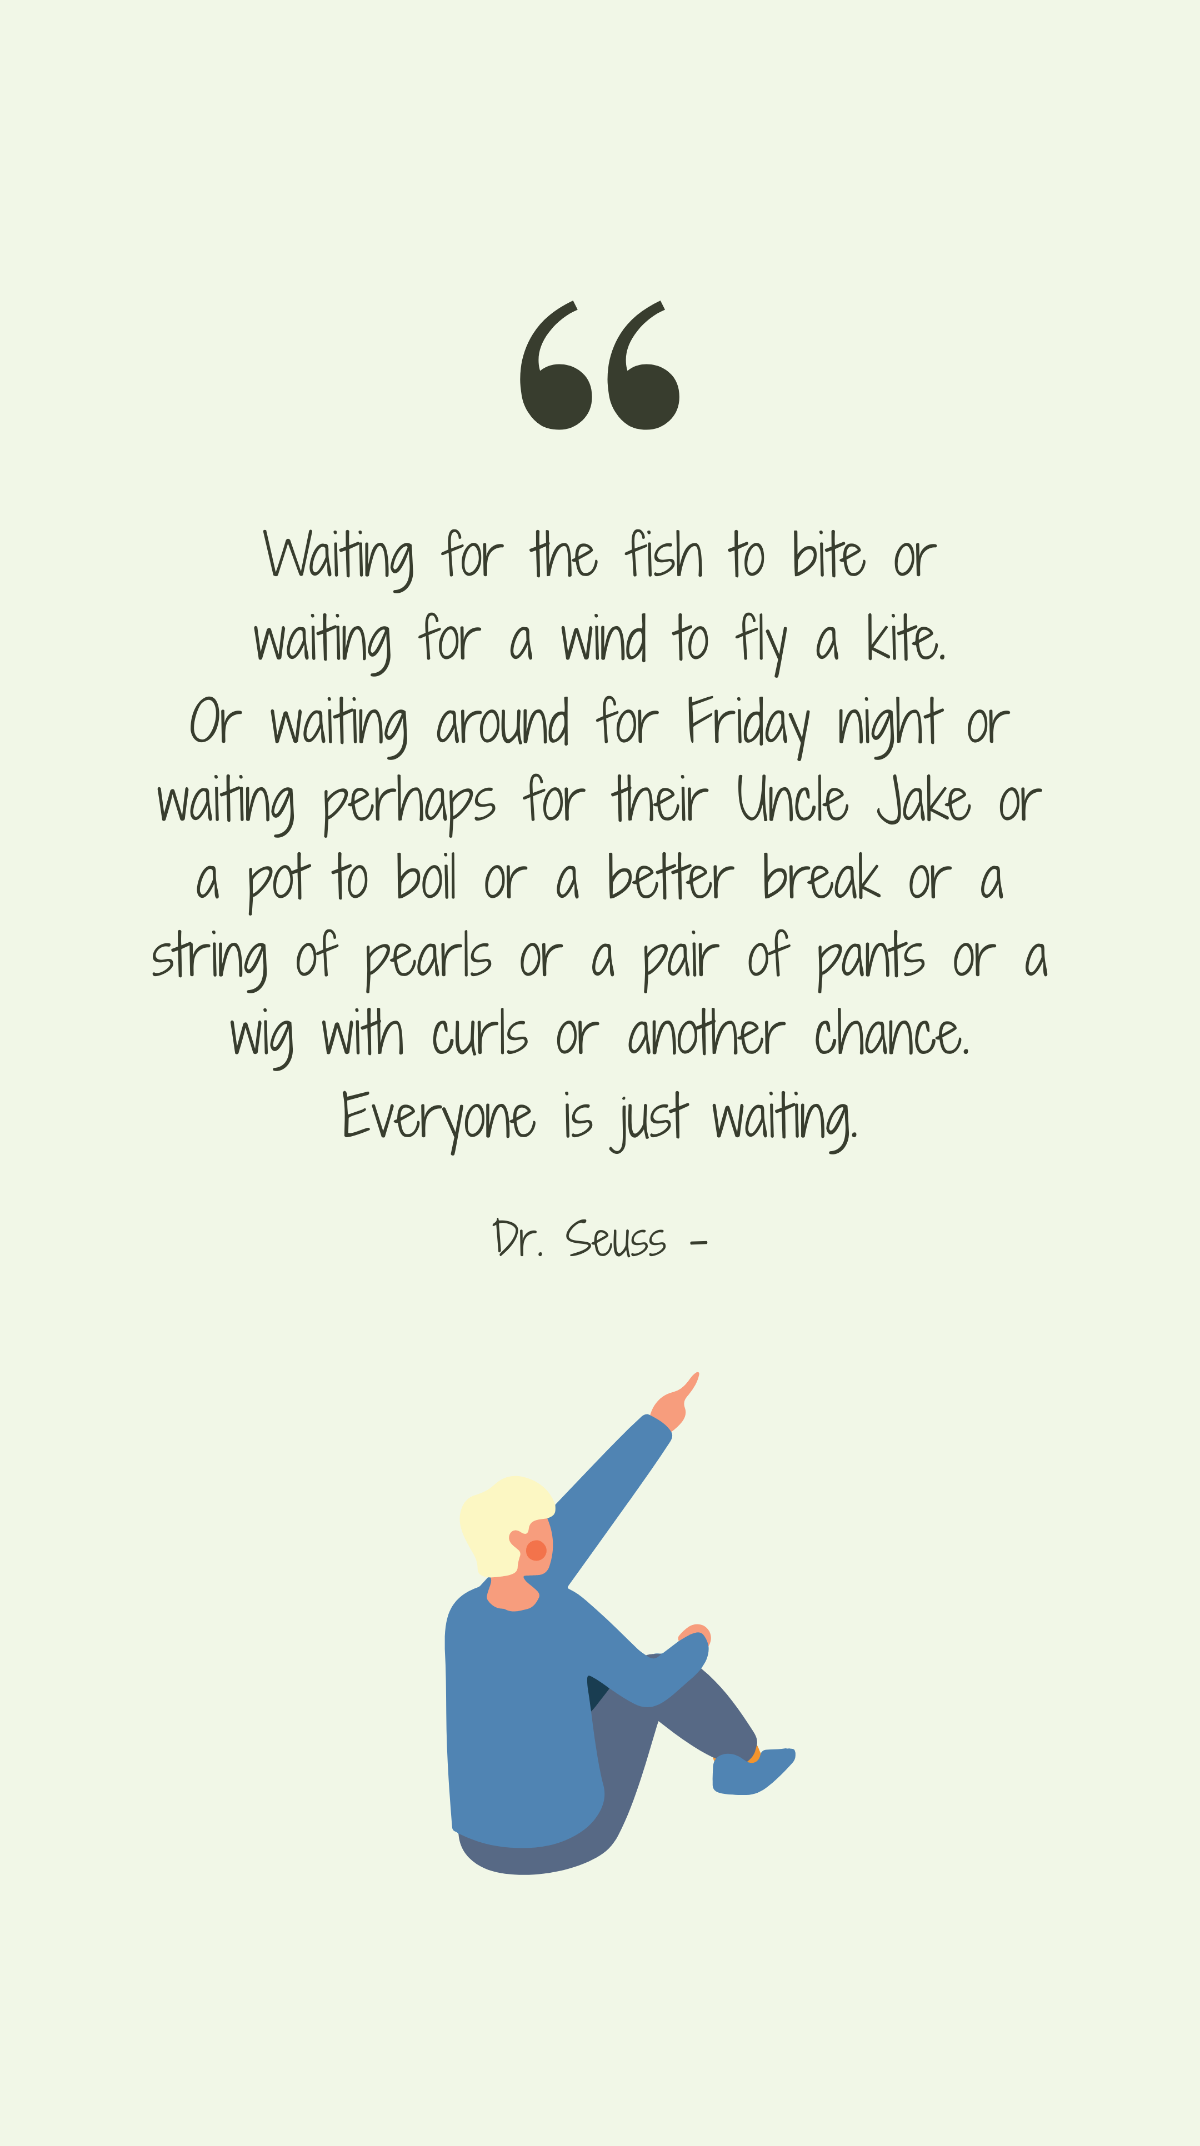 Dr. Seuss - Waiting for the fish to bite or waiting for a wind to fly a kite. Or waiting around for Friday night or waiting perhaps for their Uncle Jake or a pot to boil or a better break or a string